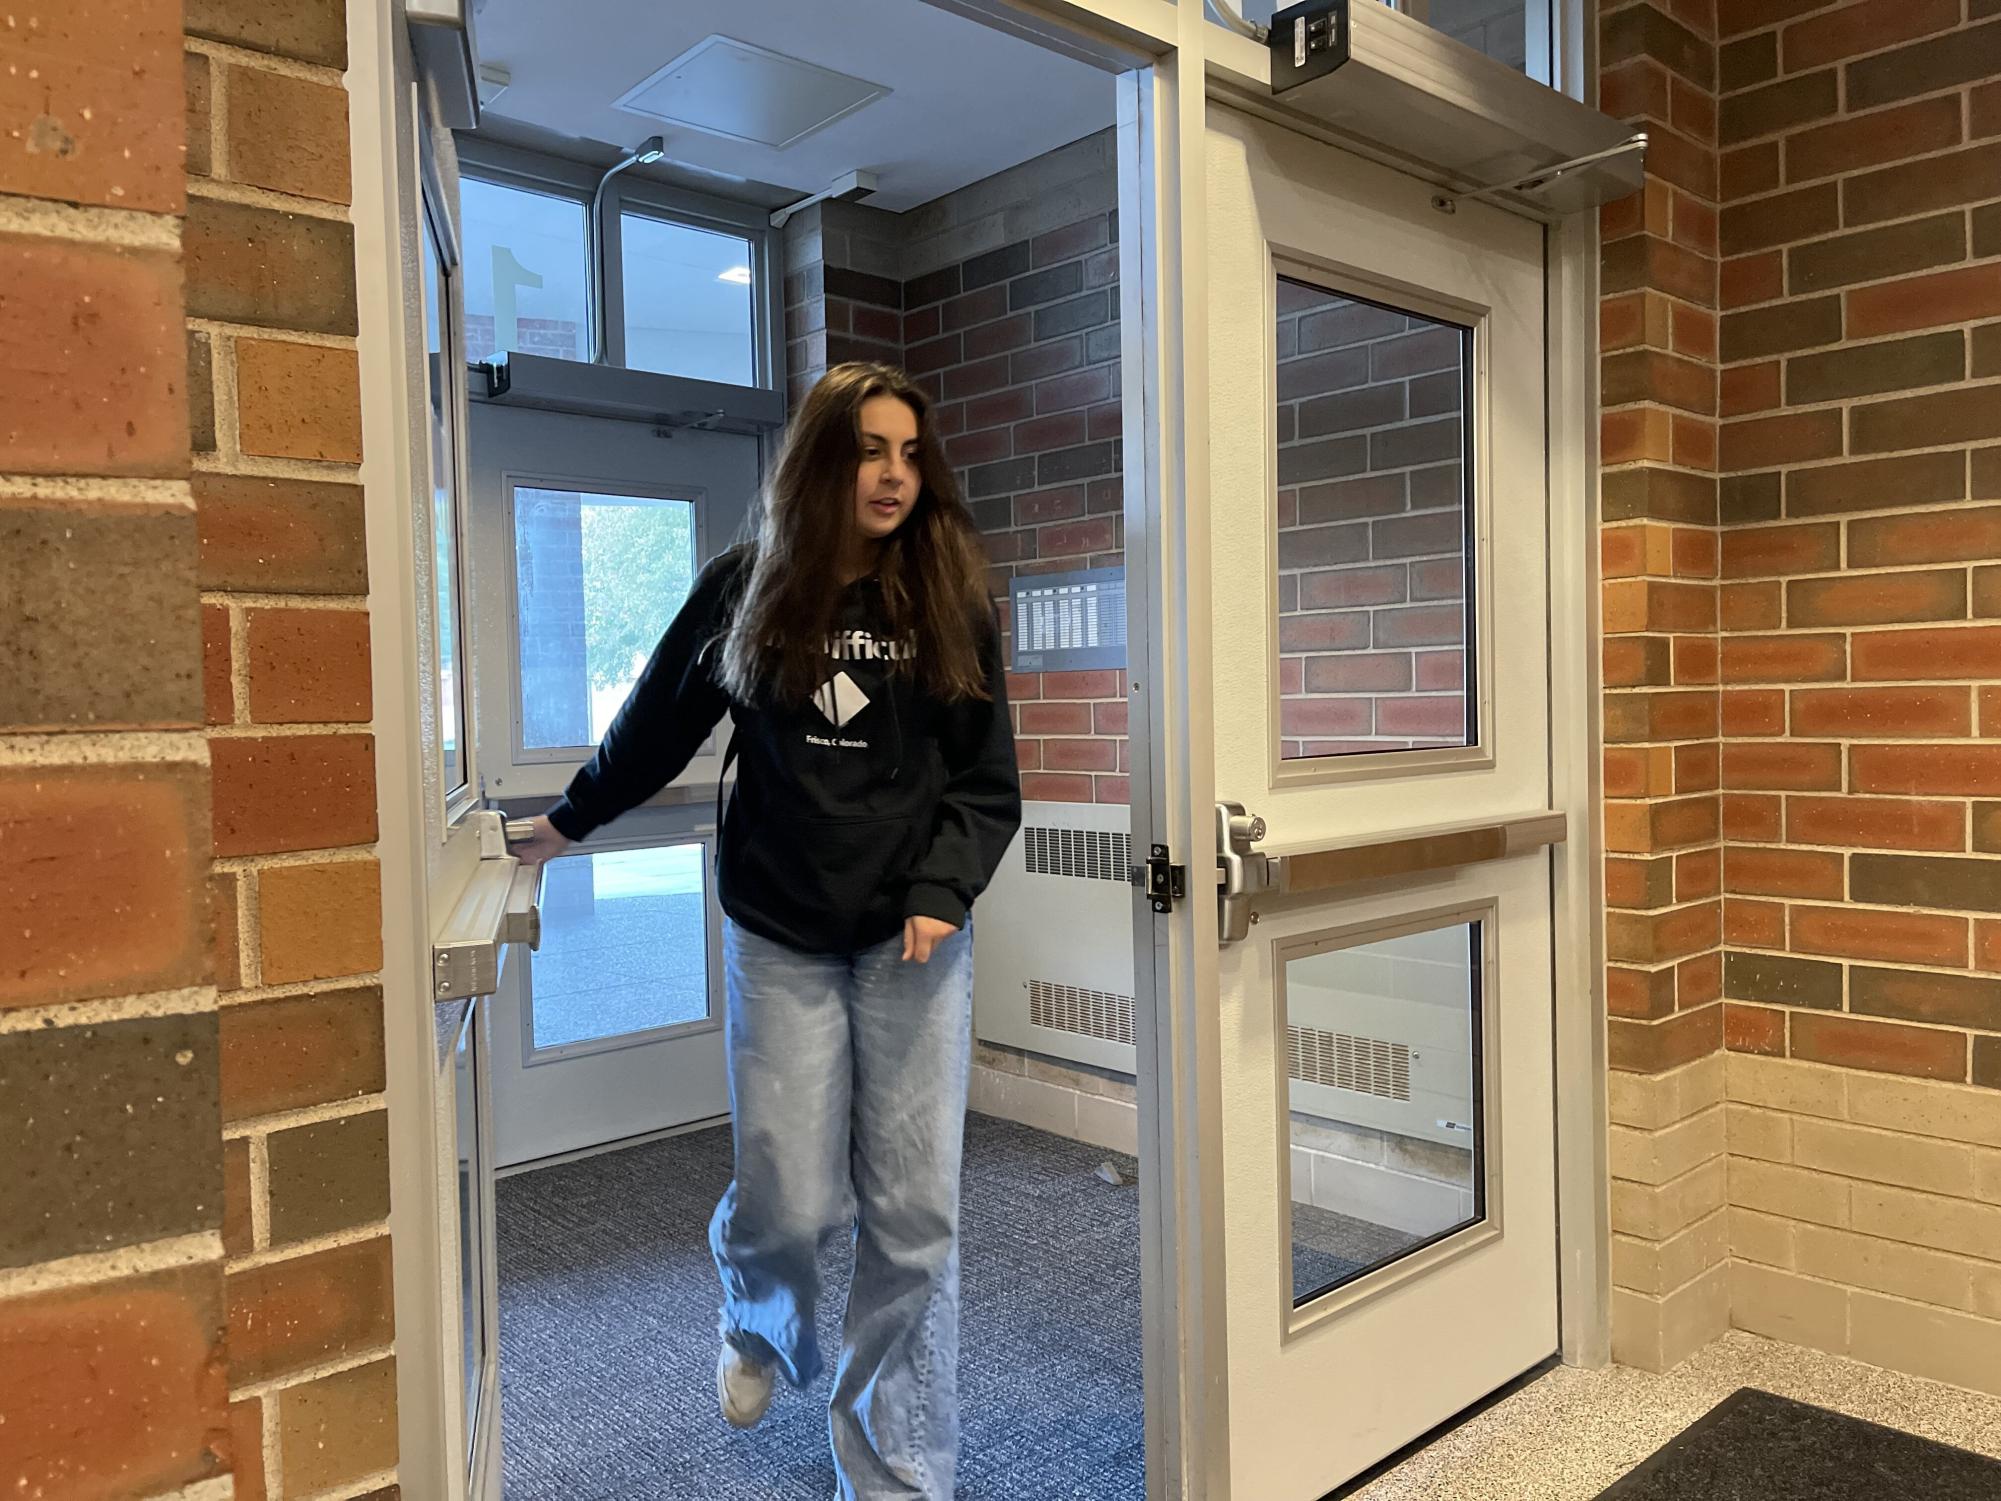 Senior Marissa Fasick walks into school before the start of the second hour as her first hour is senior elect. Seniors can utilize senior elect to reduce their daily schedule.